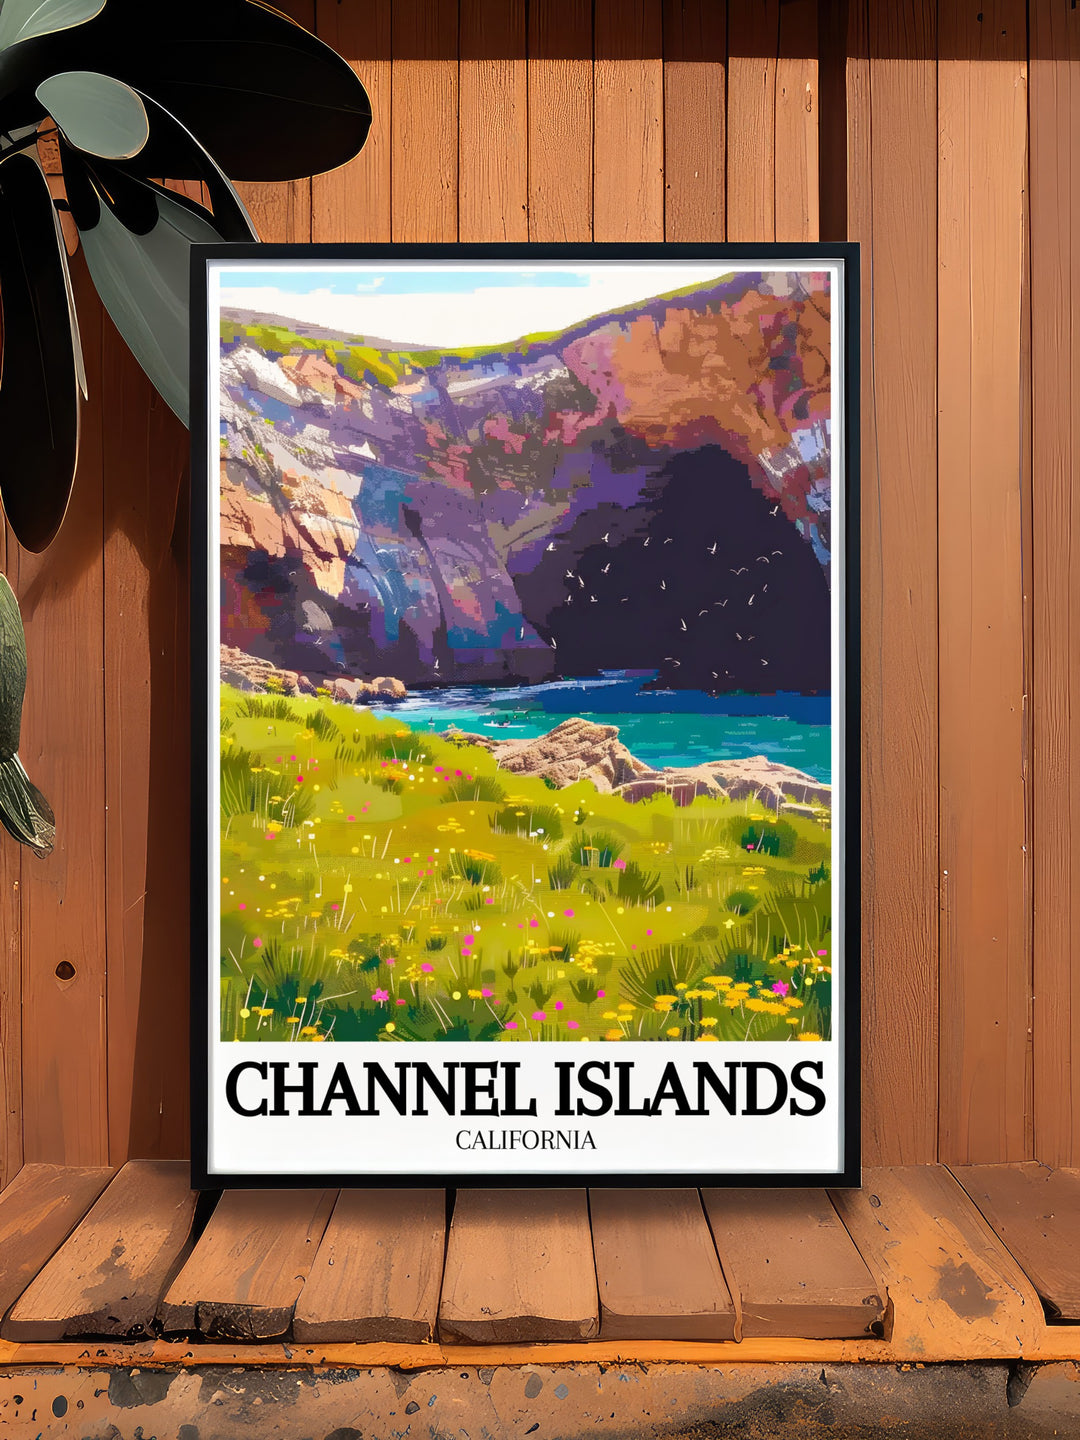 Unique Santa Rosa Island, Torrey Pines groves poster showcasing the serene landscapes and iconic landmarks of Channel Islands National Park an excellent addition to any bucket list print collection.